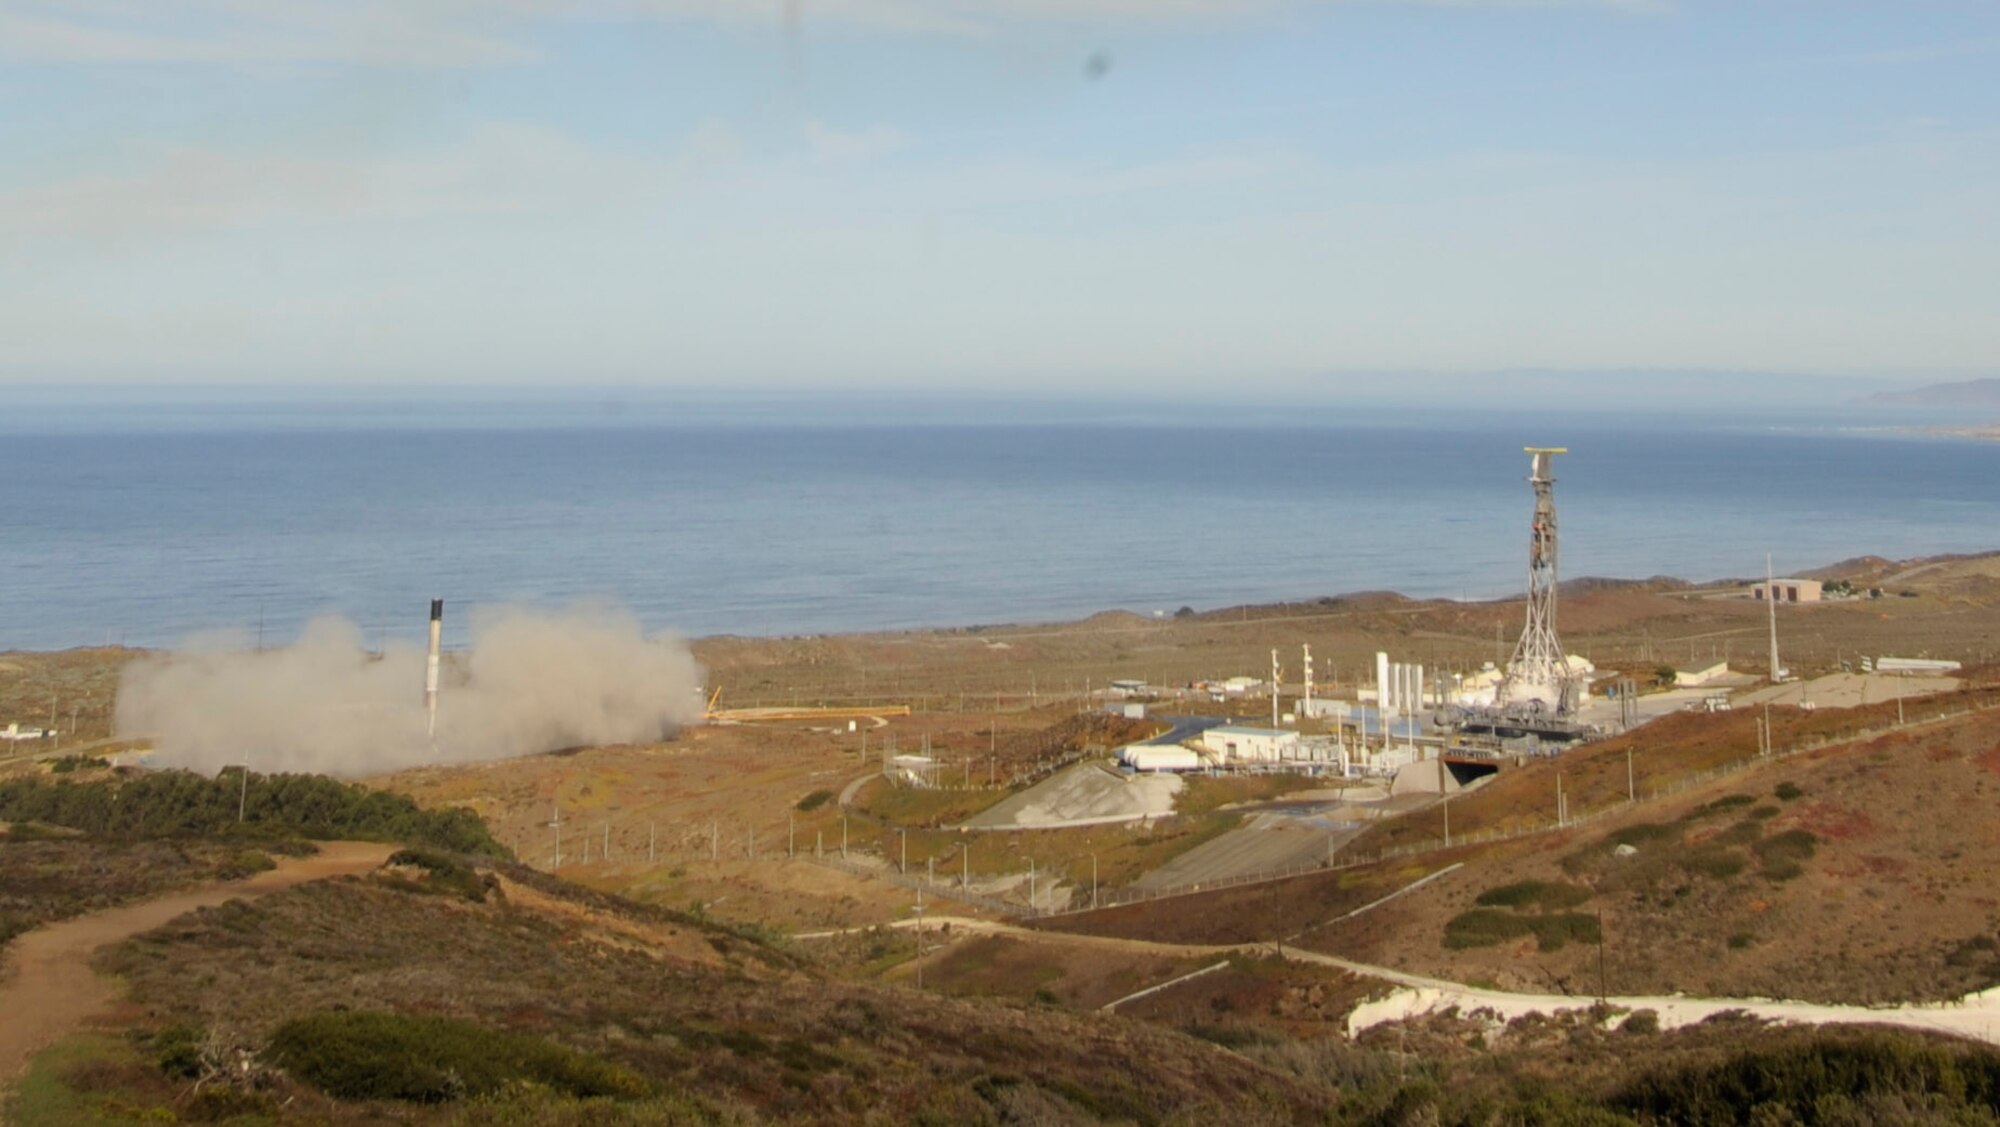 Members at Vandenberg Air Force Base launched the Sentinel-6 Michael Freilich satellite Saturday, Nov. 21, 2020, at 9:17 a.m., from Vandenberg Air Force Base, Calif.